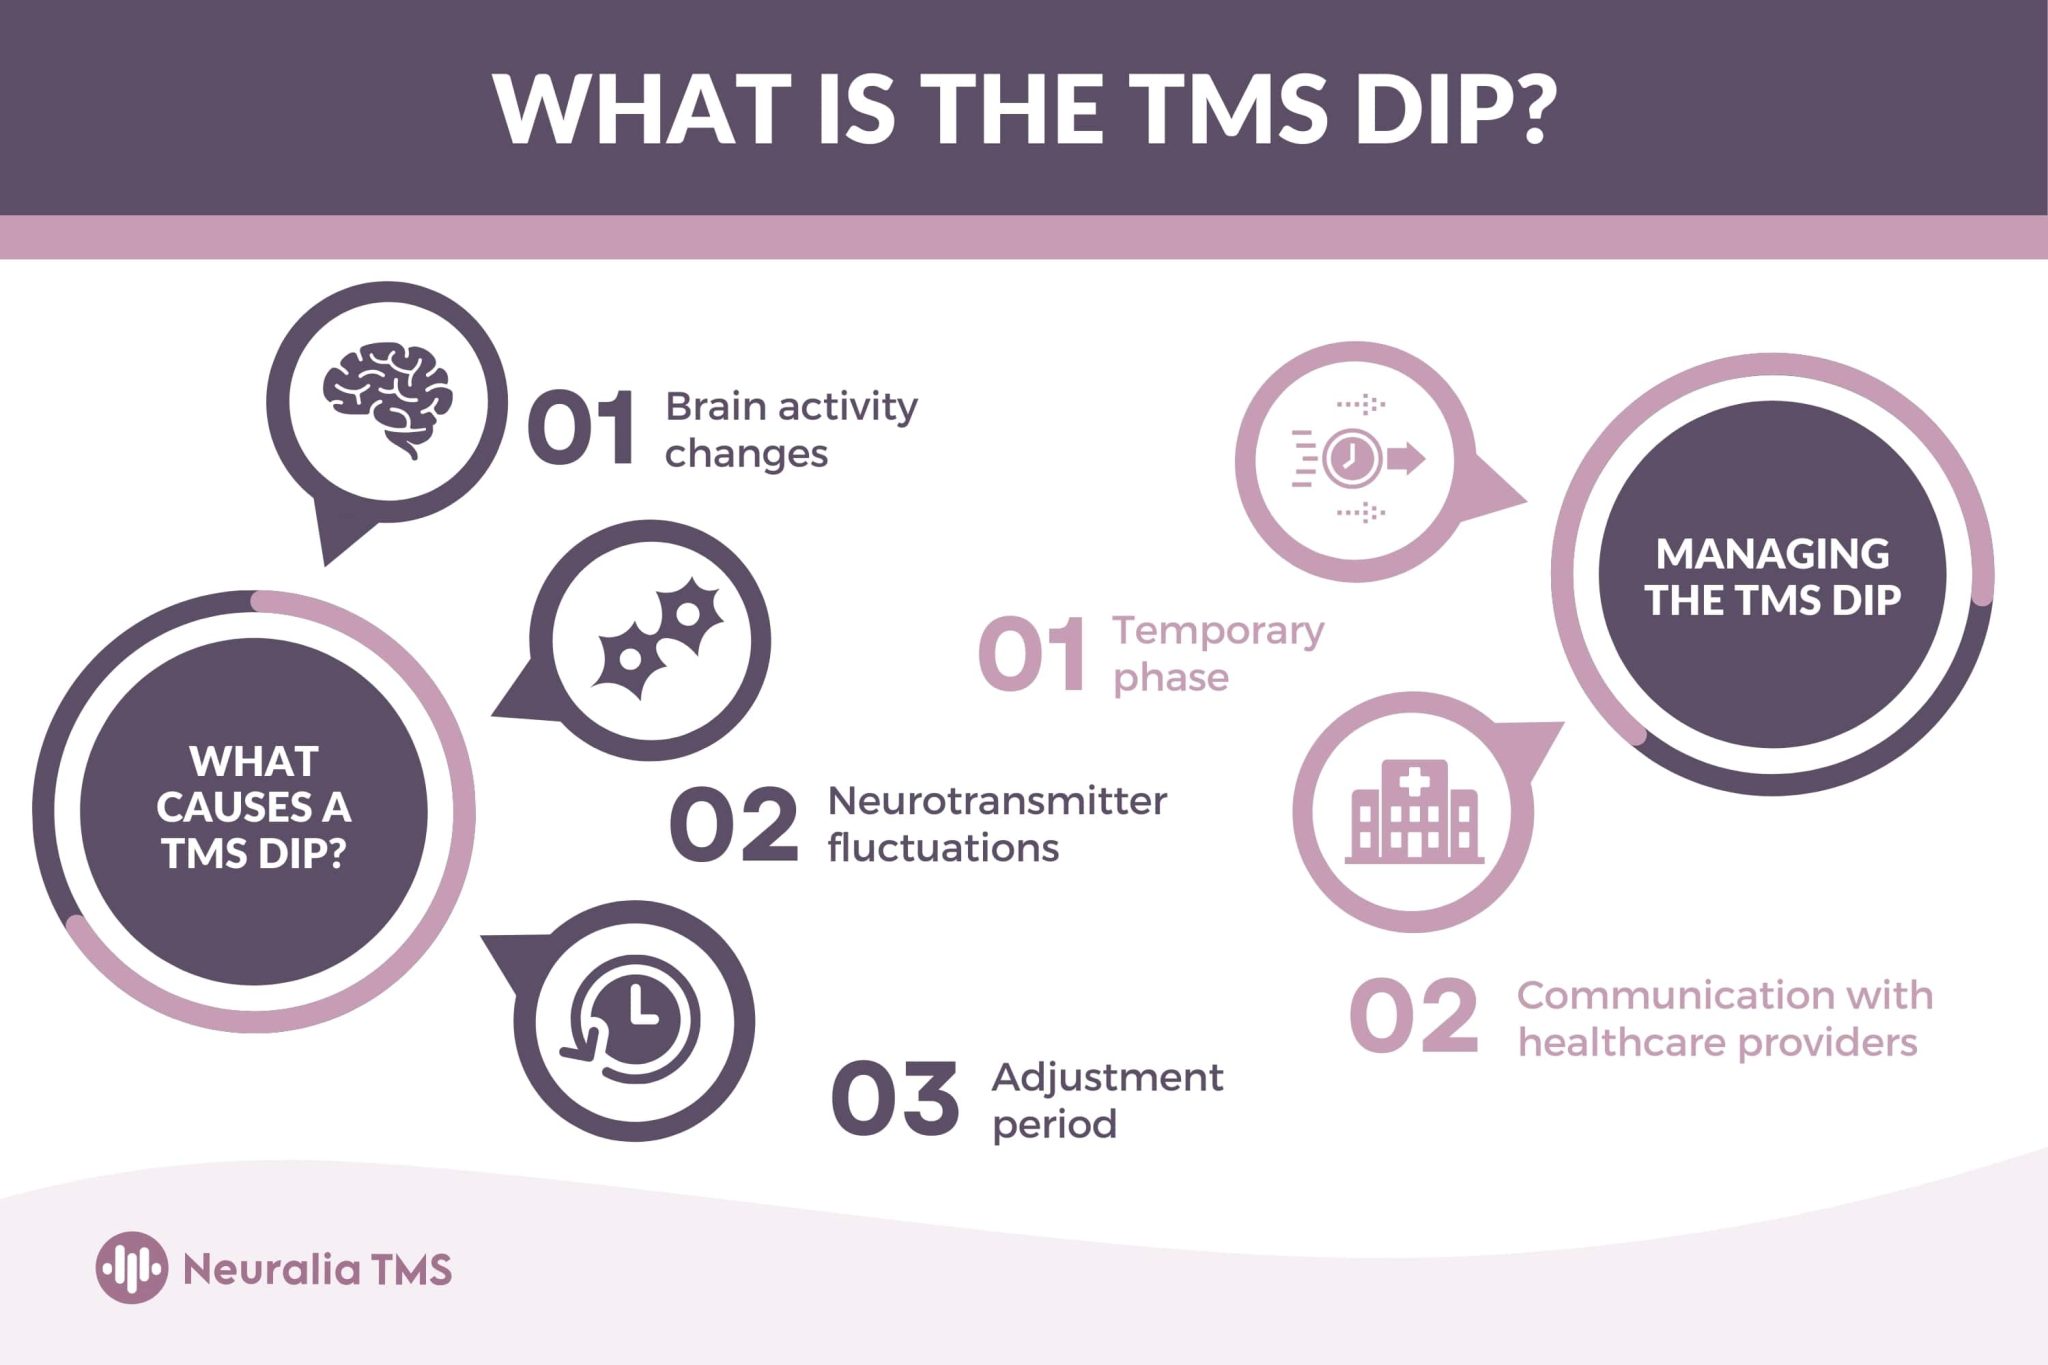 What Is The TMS Dip?